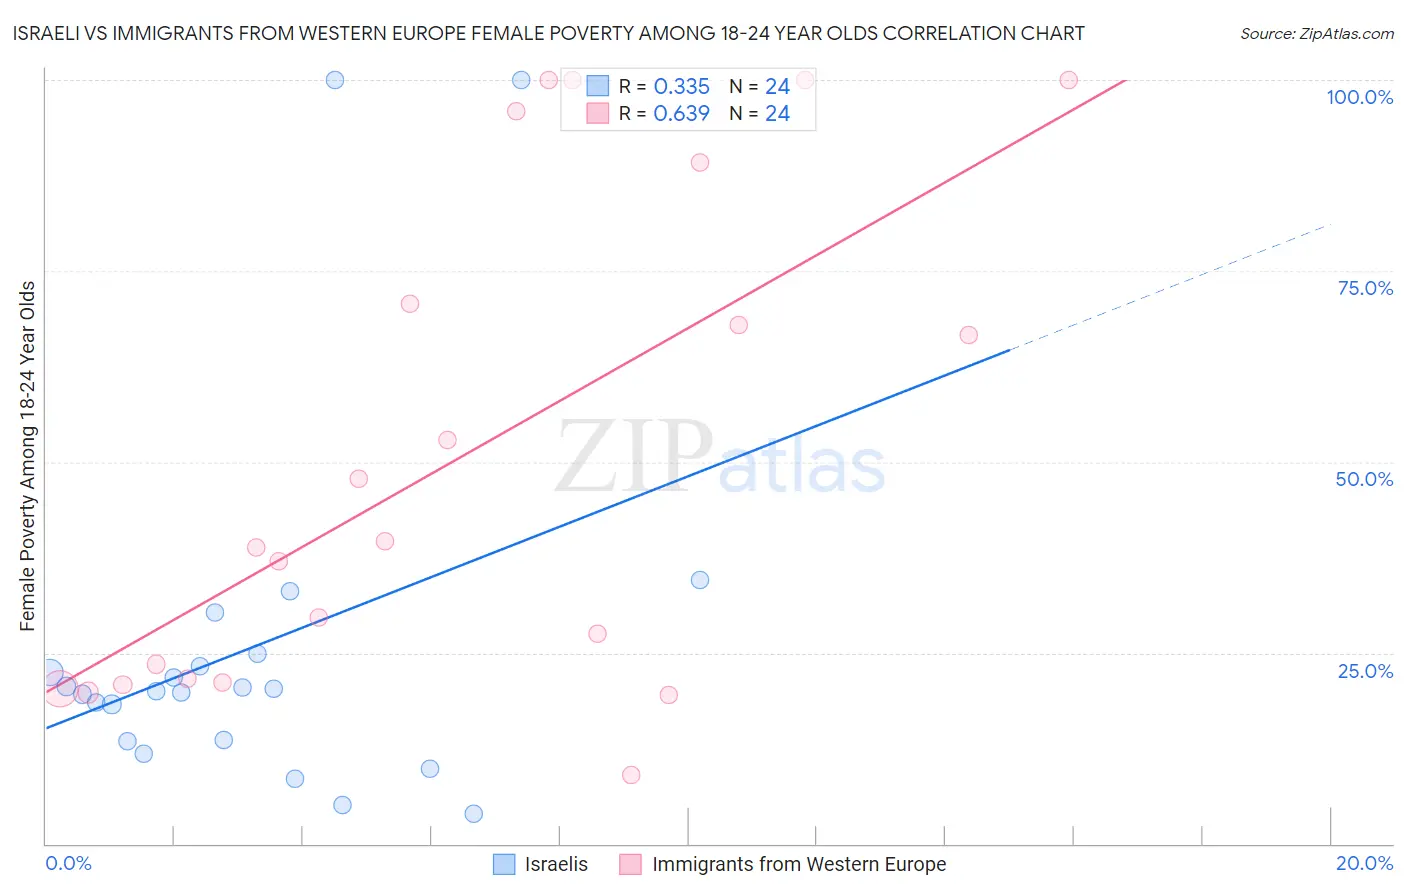 Israeli vs Immigrants from Western Europe Female Poverty Among 18-24 Year Olds